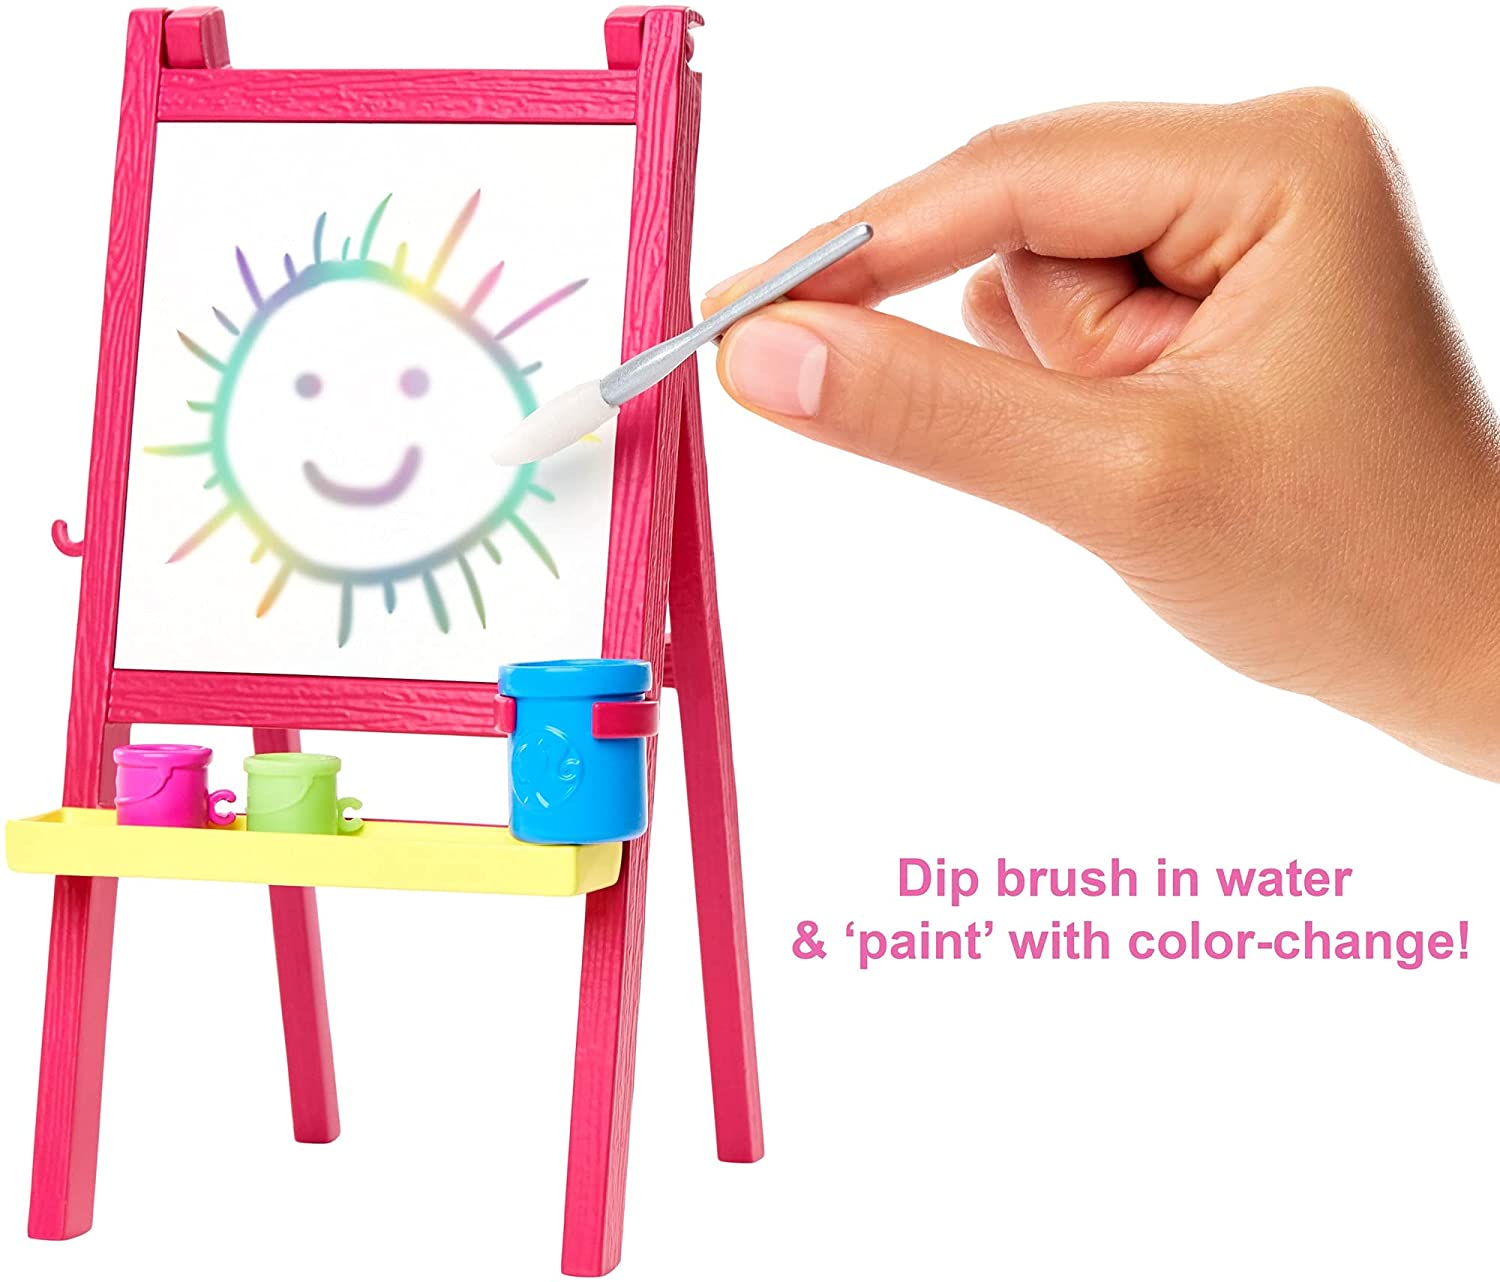 Mattel Barbie® Art Teacher Playset with Blonde Doll, Toddler Doll, Easel and Accessories